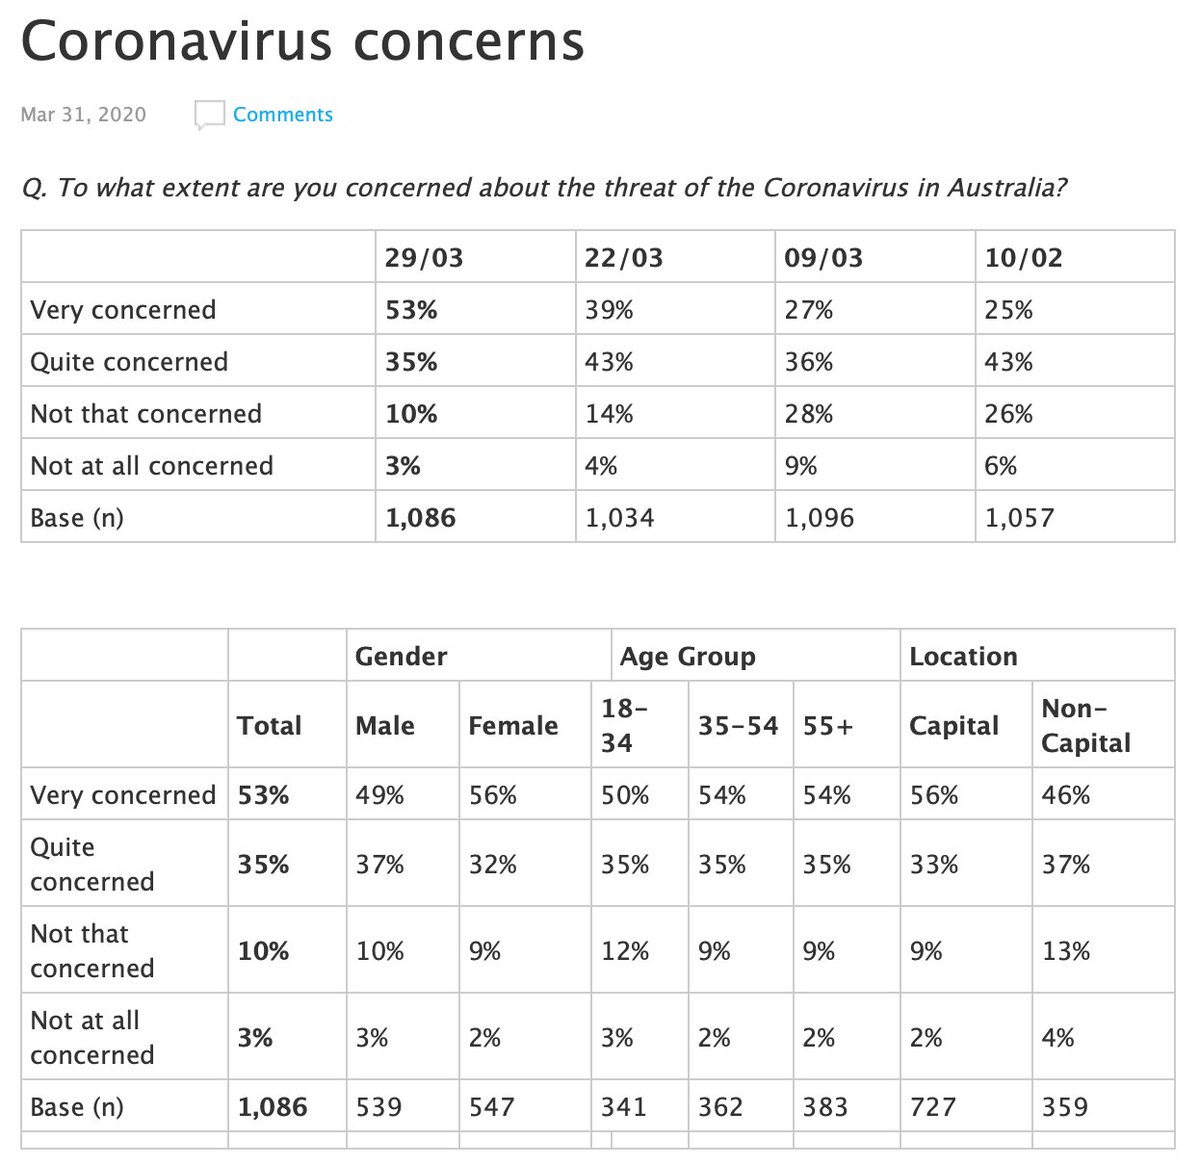 “Q. To what extent are you concerned about the threat of the Coronavirus in Australia?” The majority of Australia’s are now “very concerned” cf 39% last week.  https://essentialvision.com.au/coronavirus-concerns-3